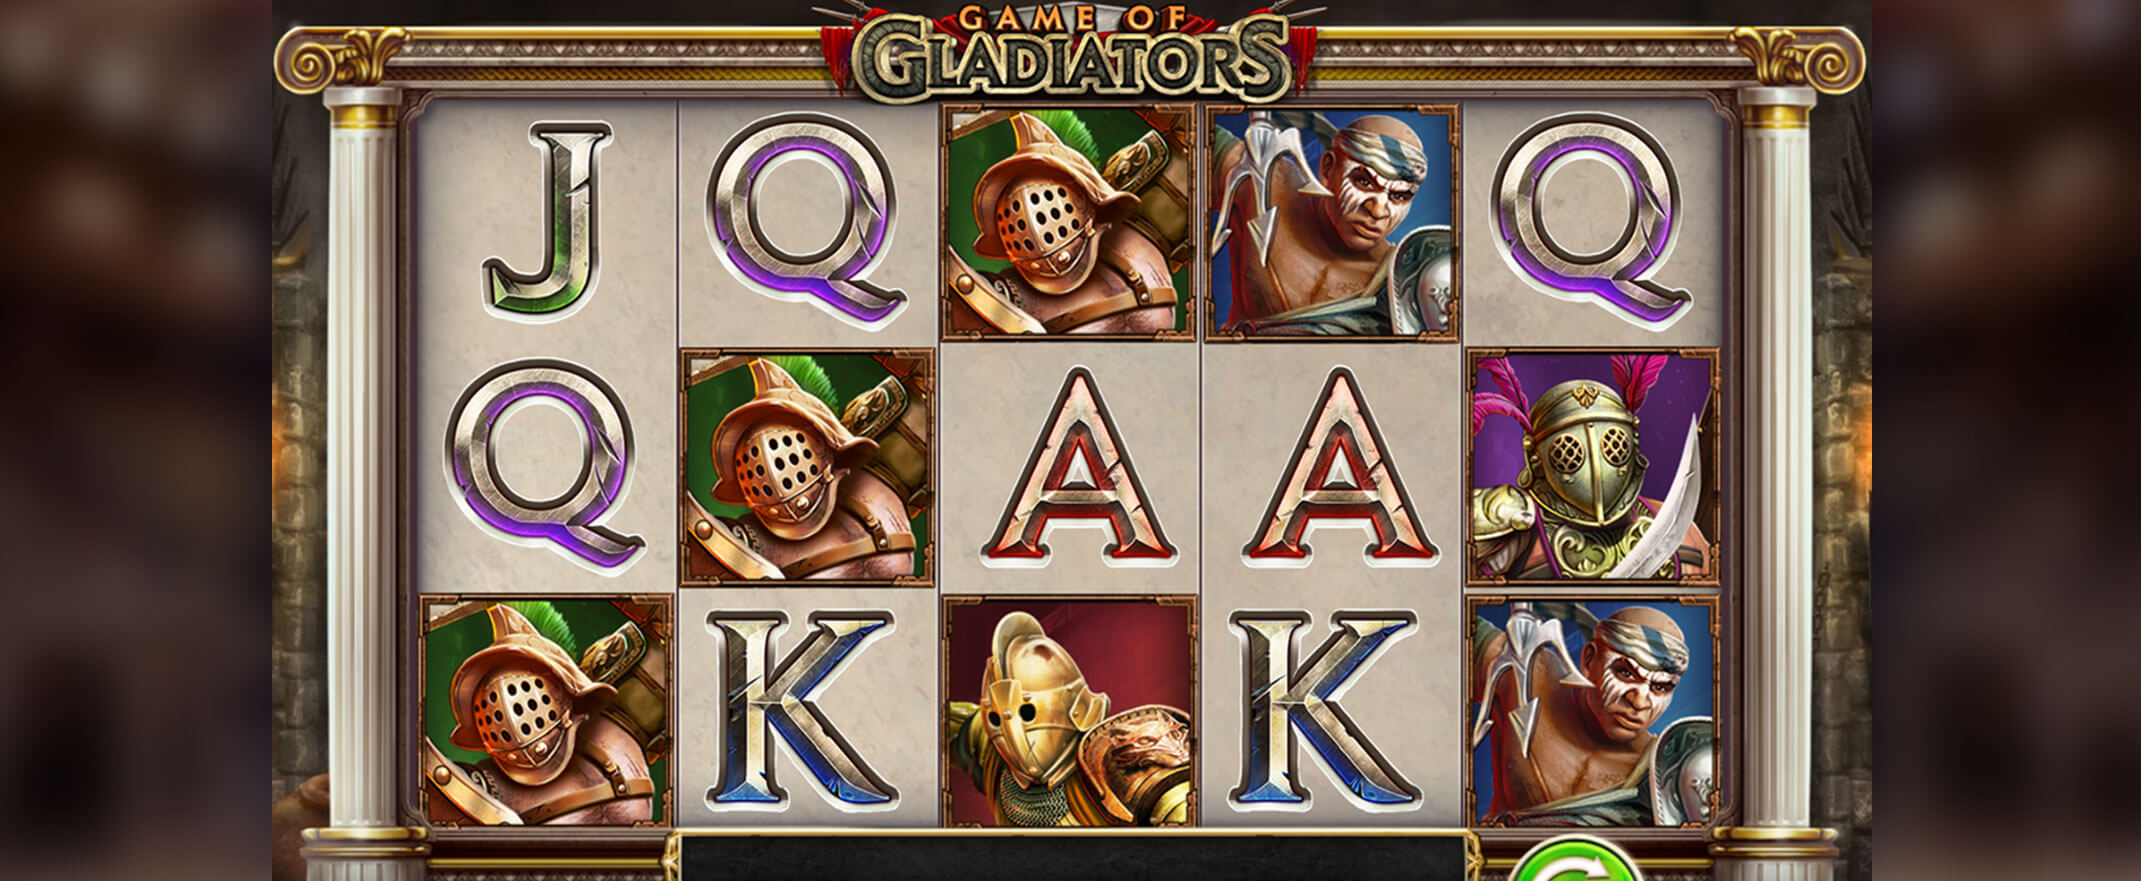 Game of Gladiators slot from Play'n Go